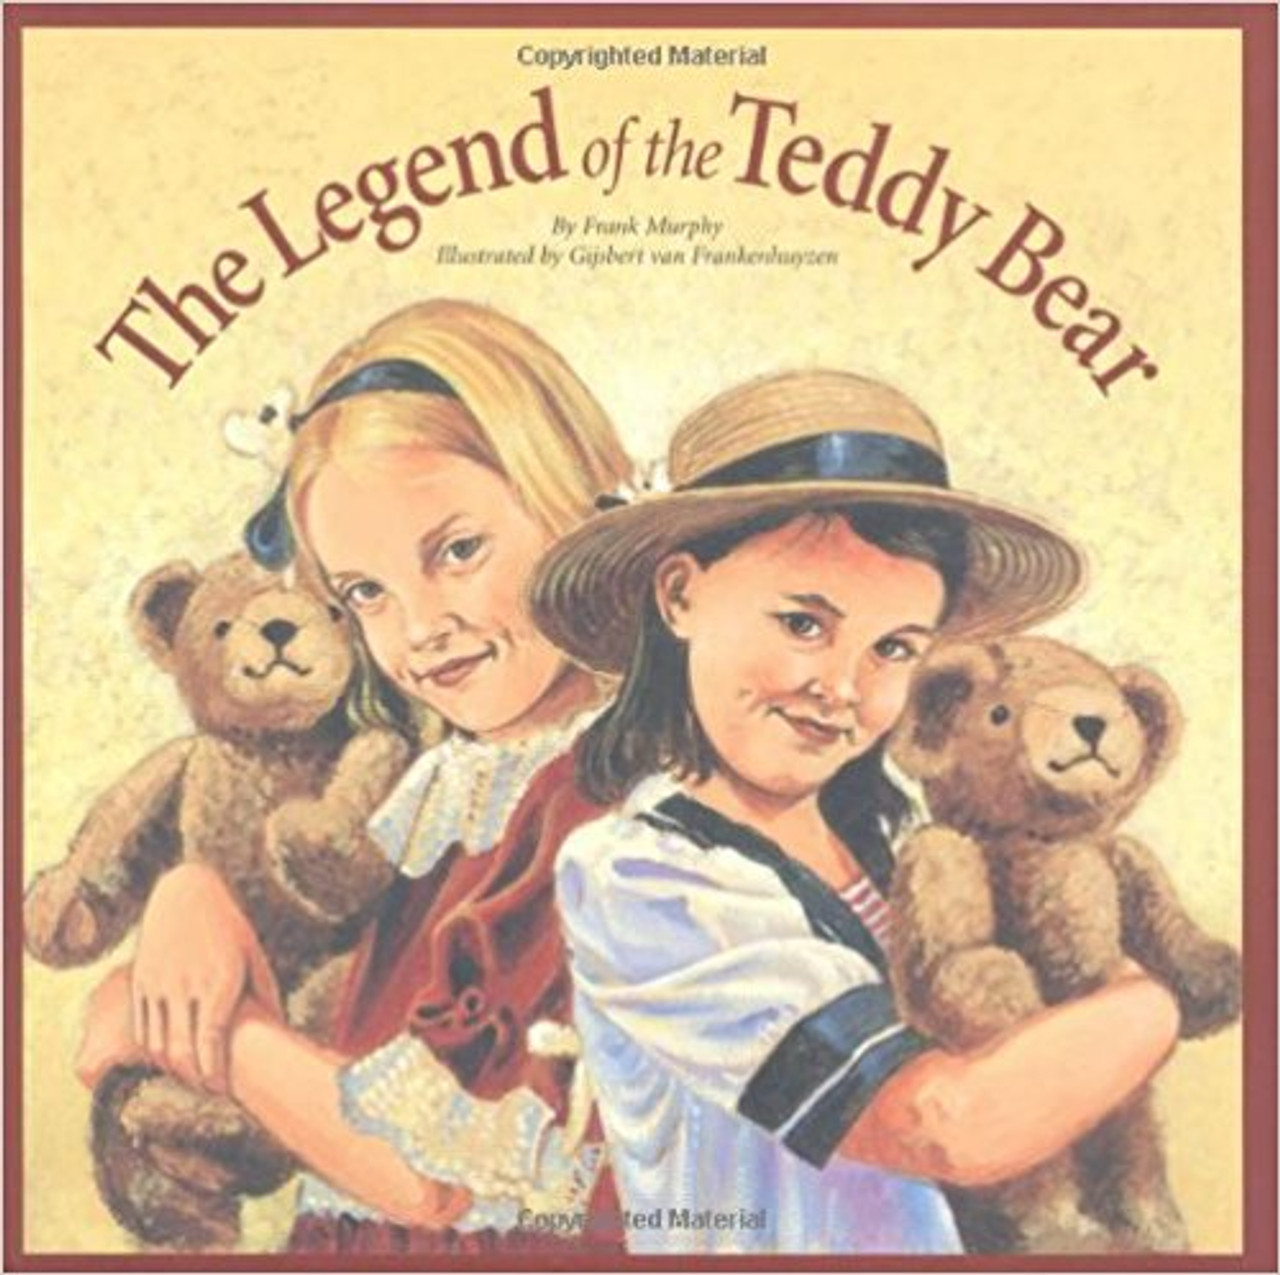 The Legend of the Teddy Bear by Frank Murphy